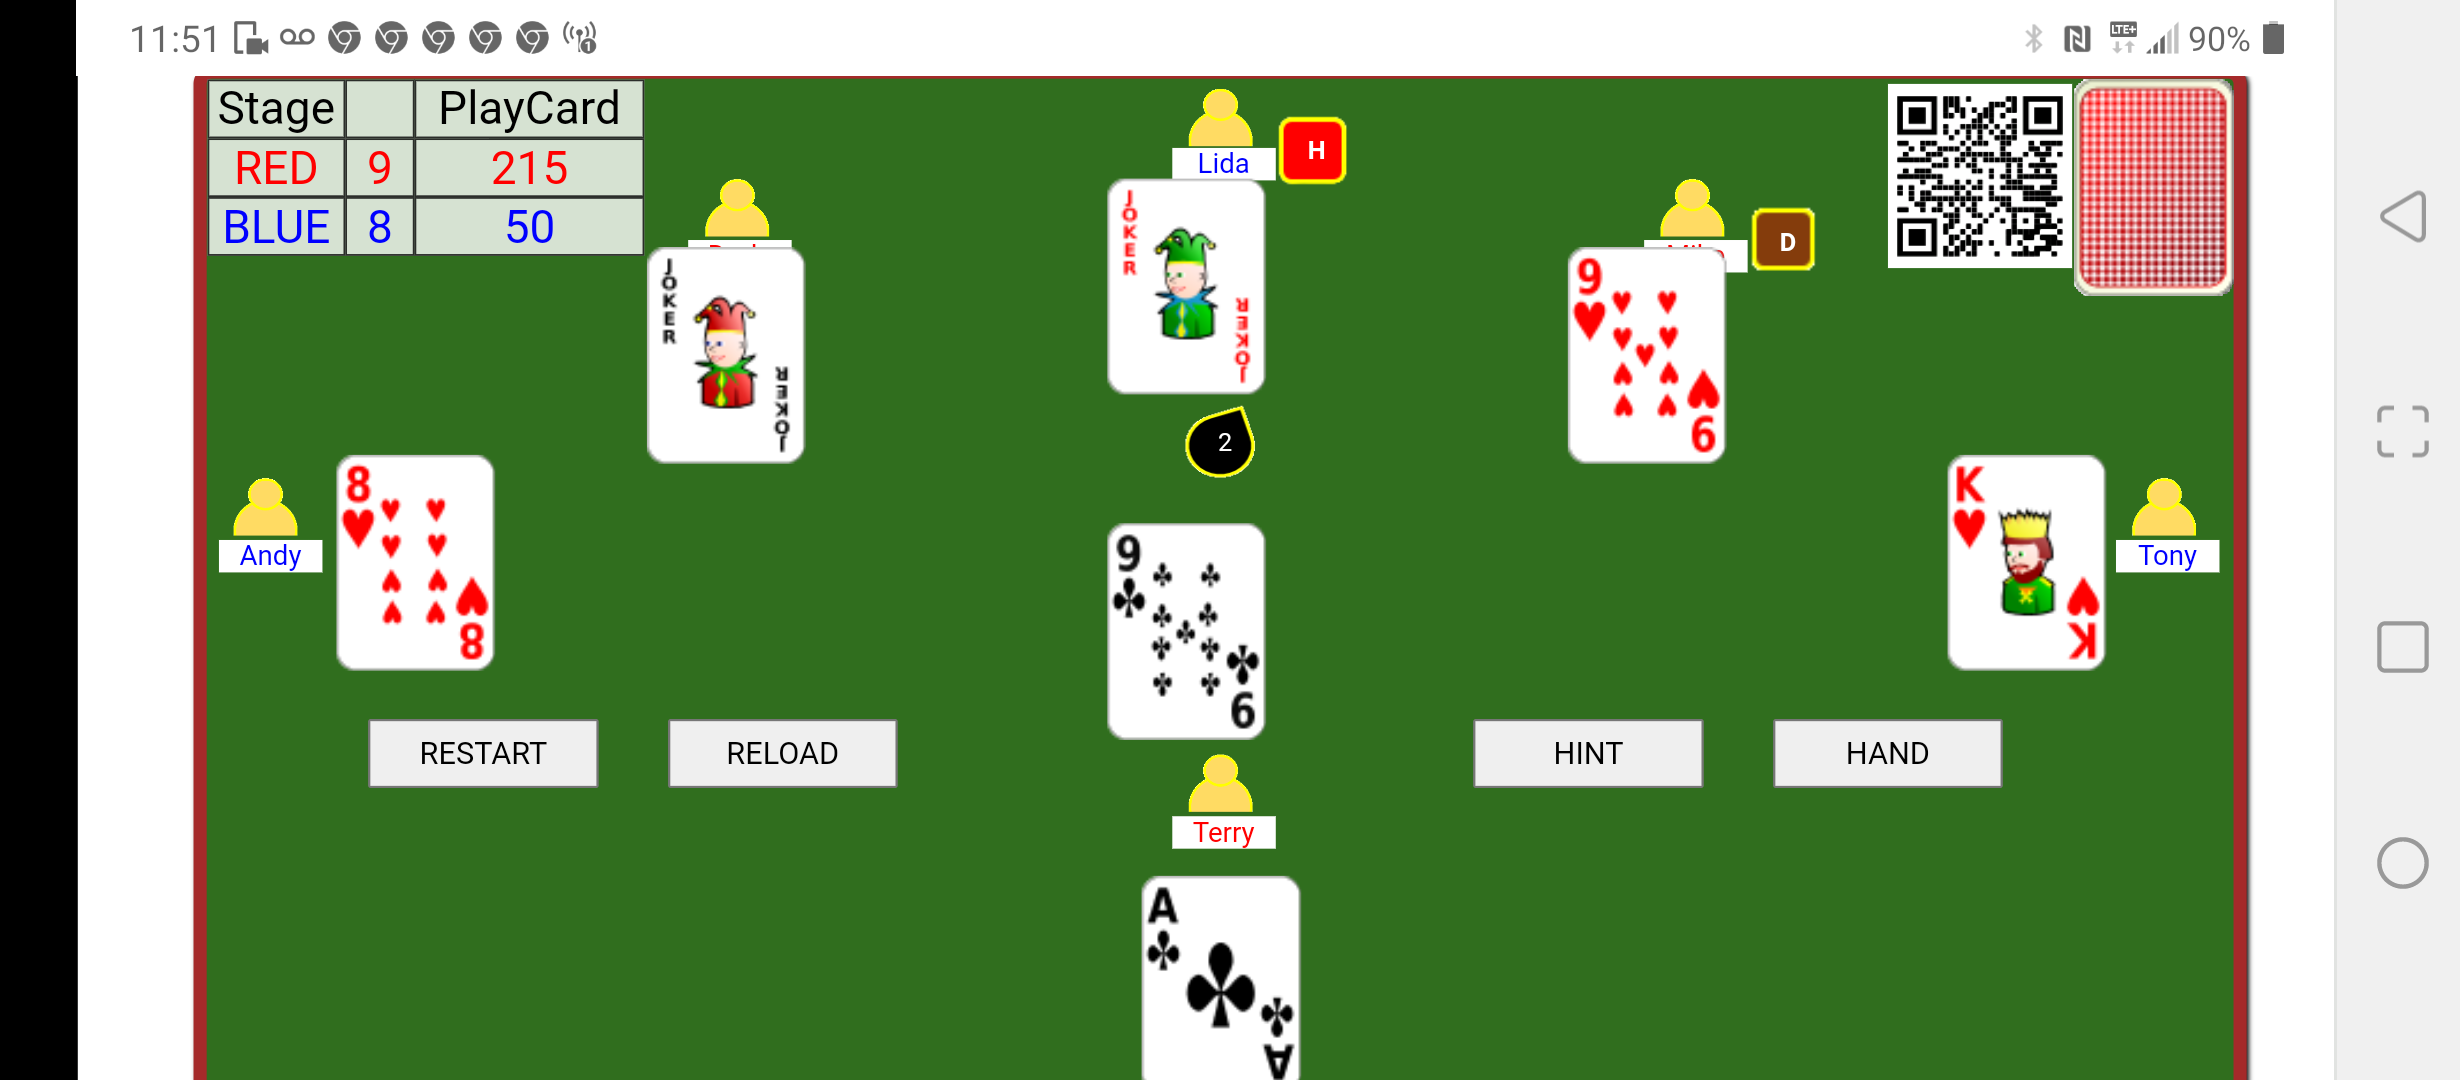 html5 tractor card game Screenshot_20220120-115146.png